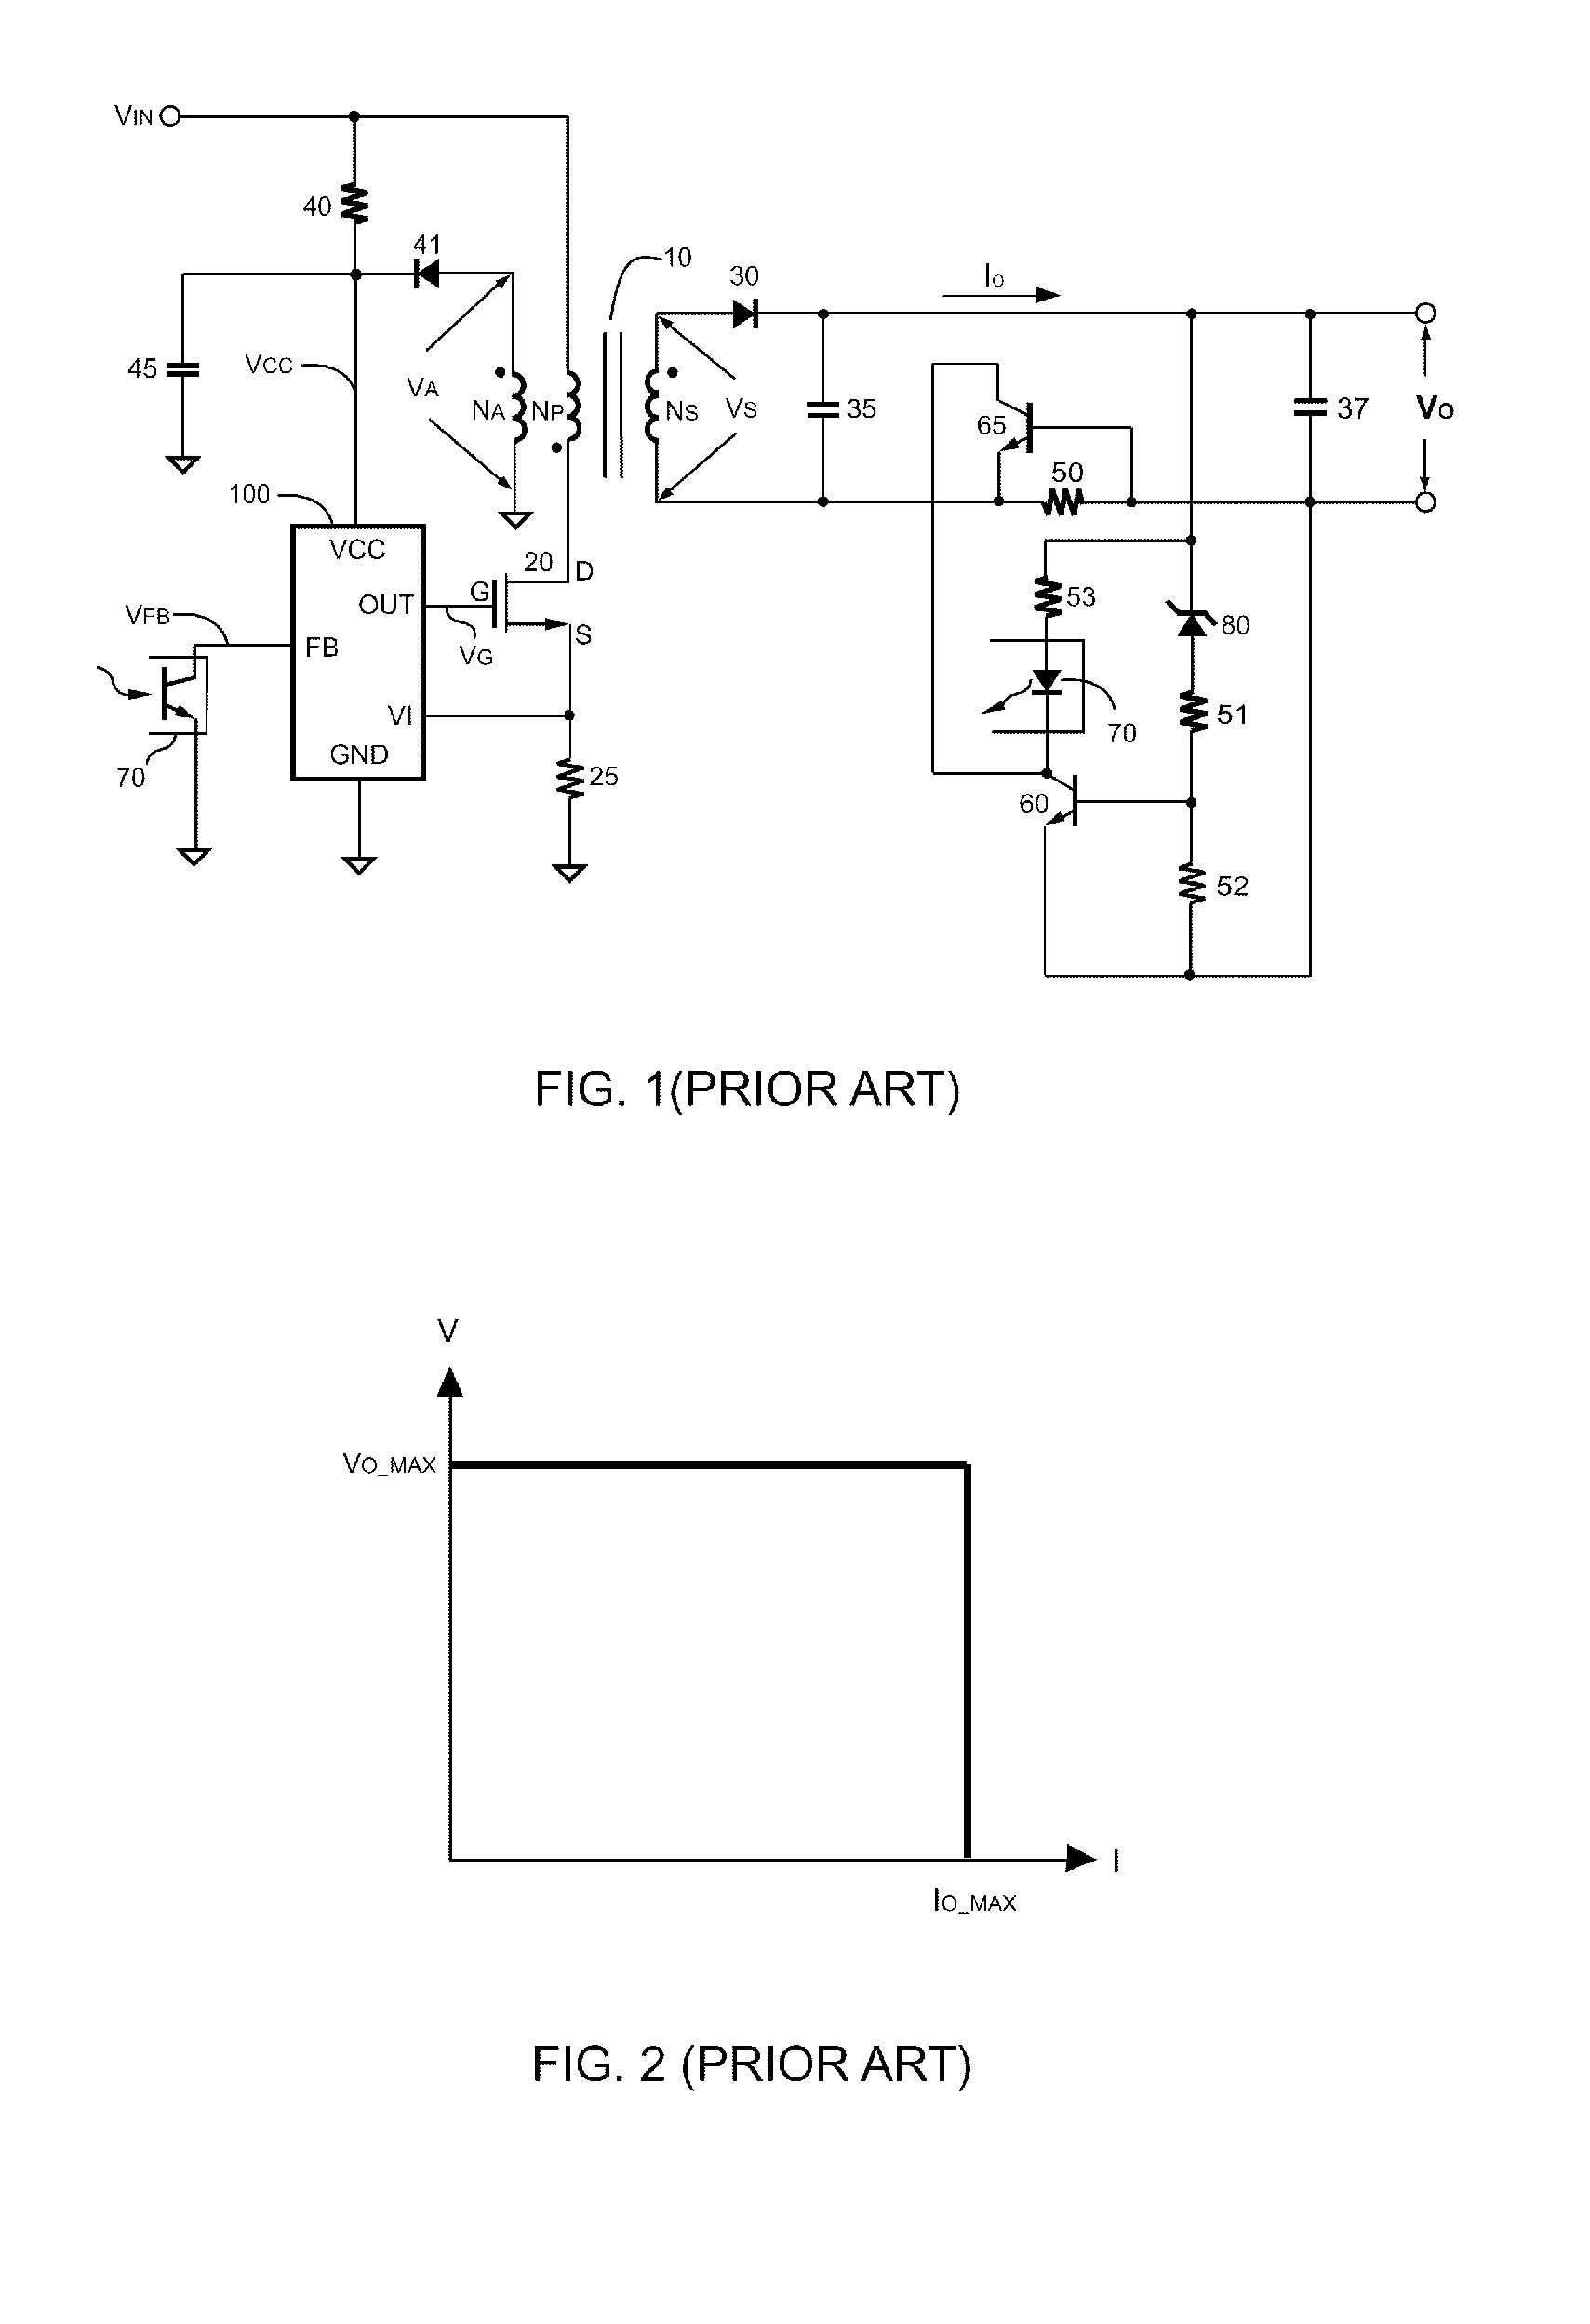 Transistor drive circuit of power converter operating in a wide voltage range